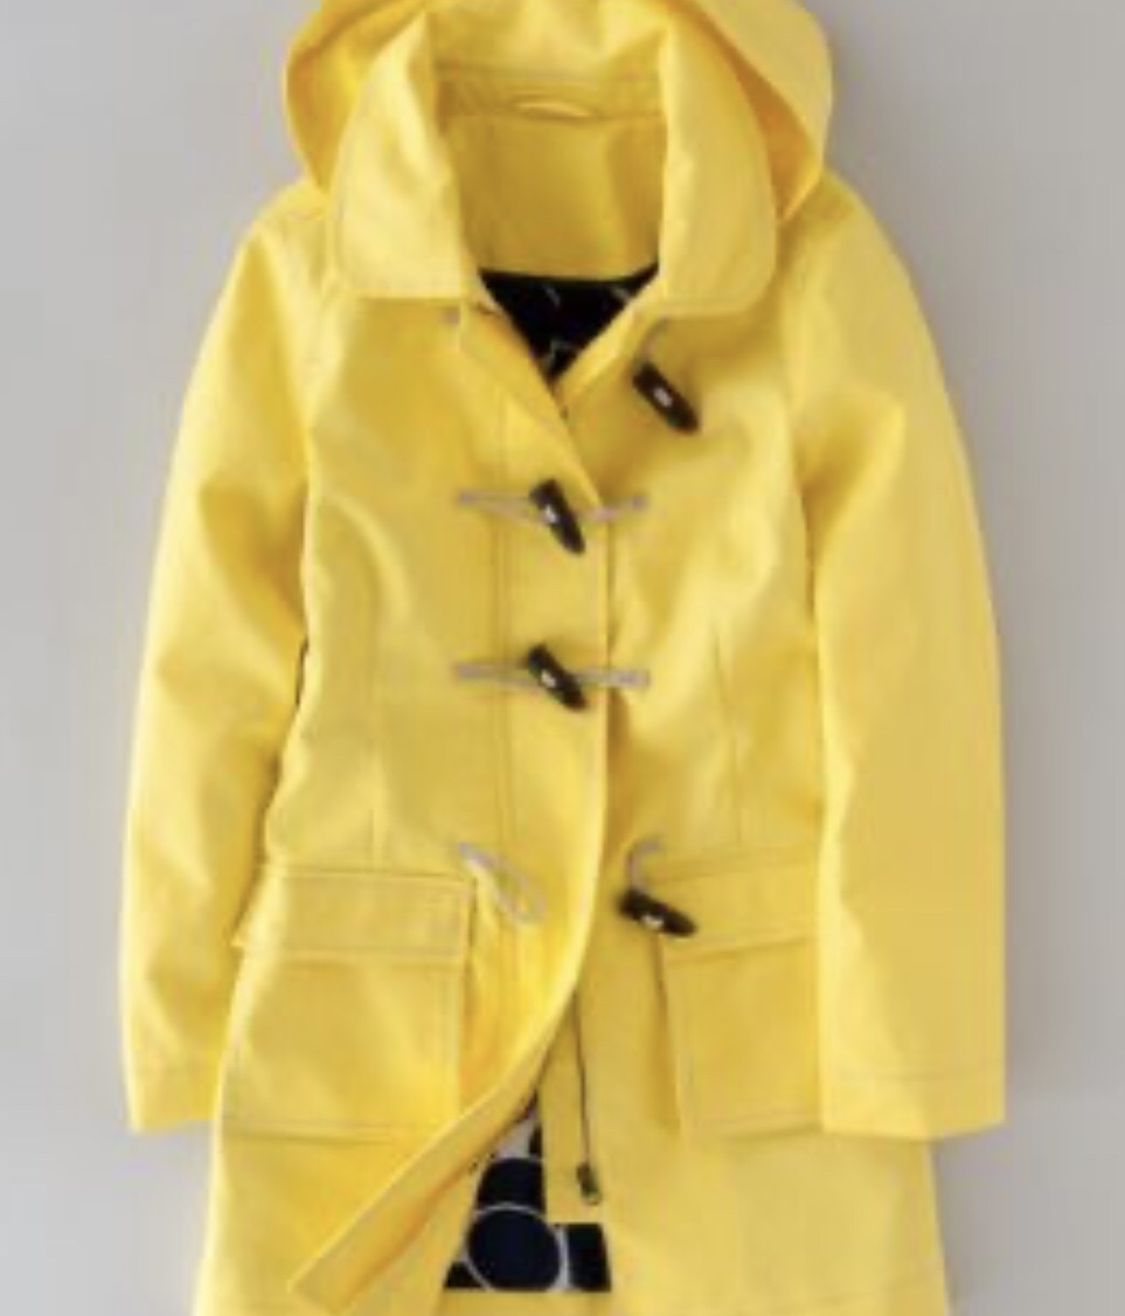 Boden removable Hooded Rain Parka Jacket toggle Women's Size 8 US $198. Condition is "Pre-owned". Shipped with USPS Priority Mail. Measurements and f